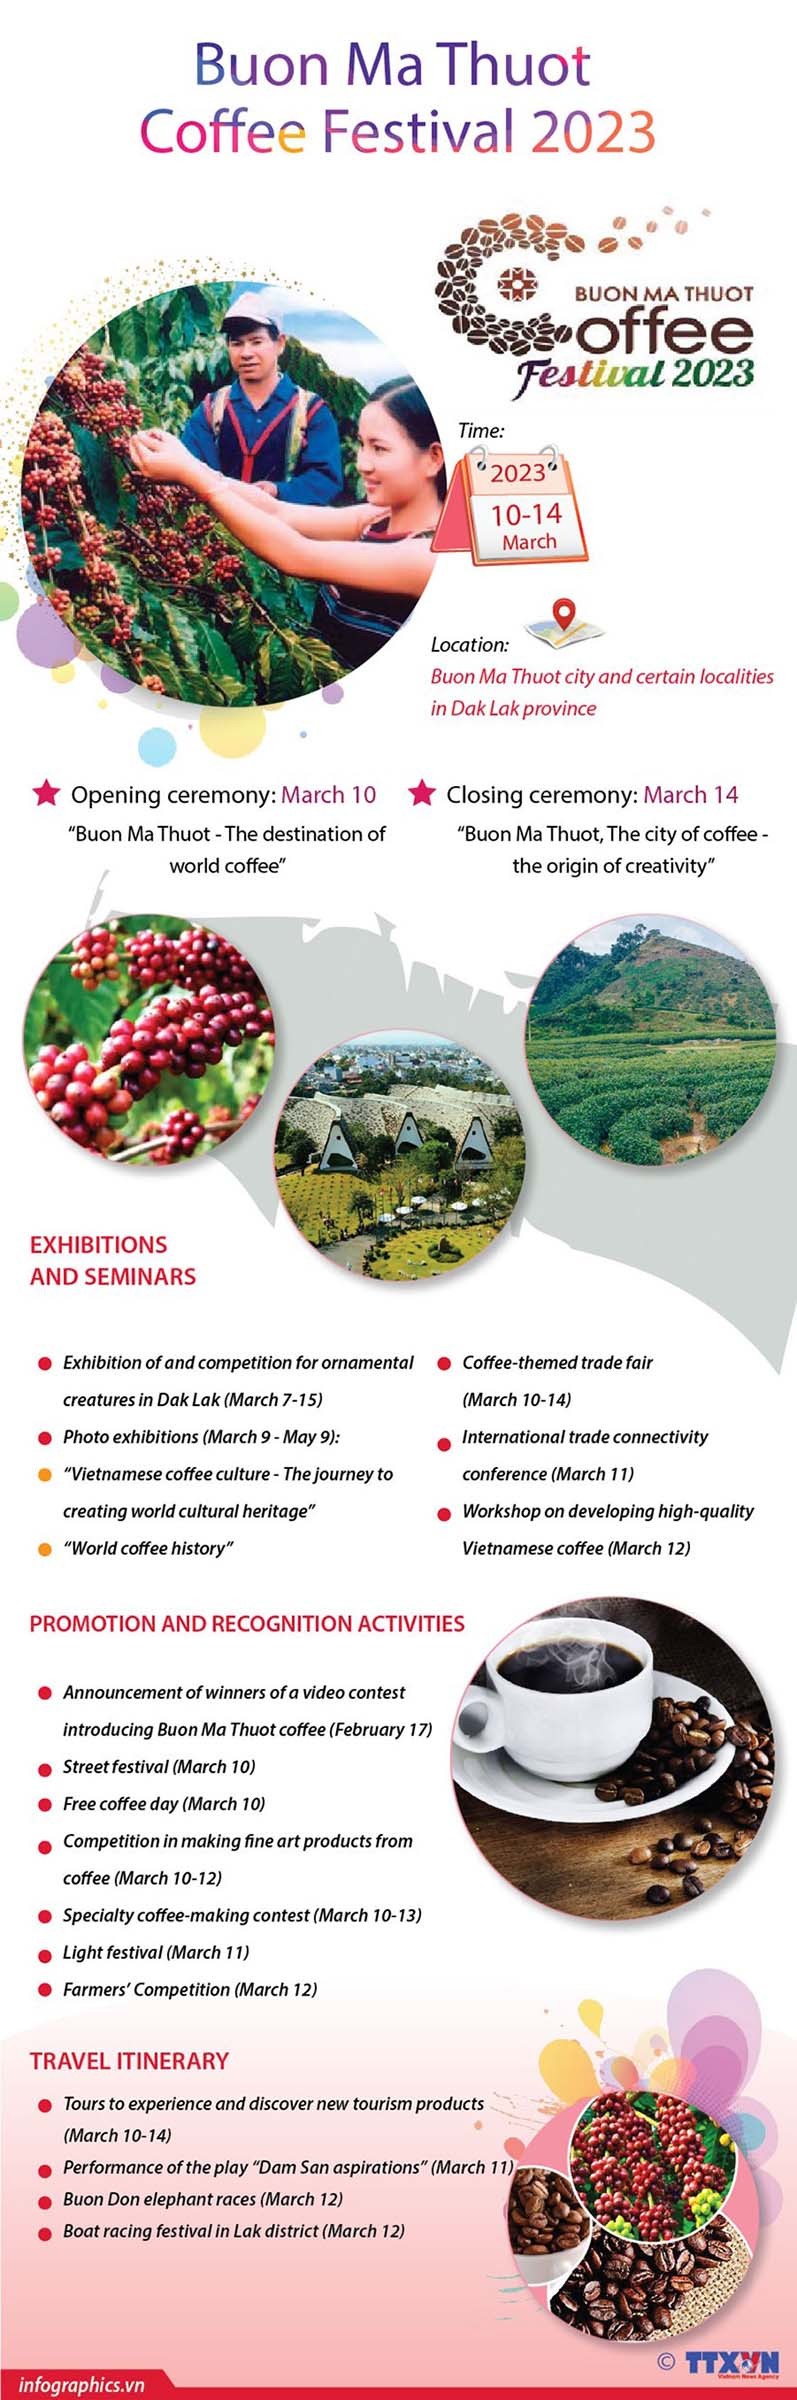 Buon Ma Thuot Coffee Festival 2023 lasts from March 10-14